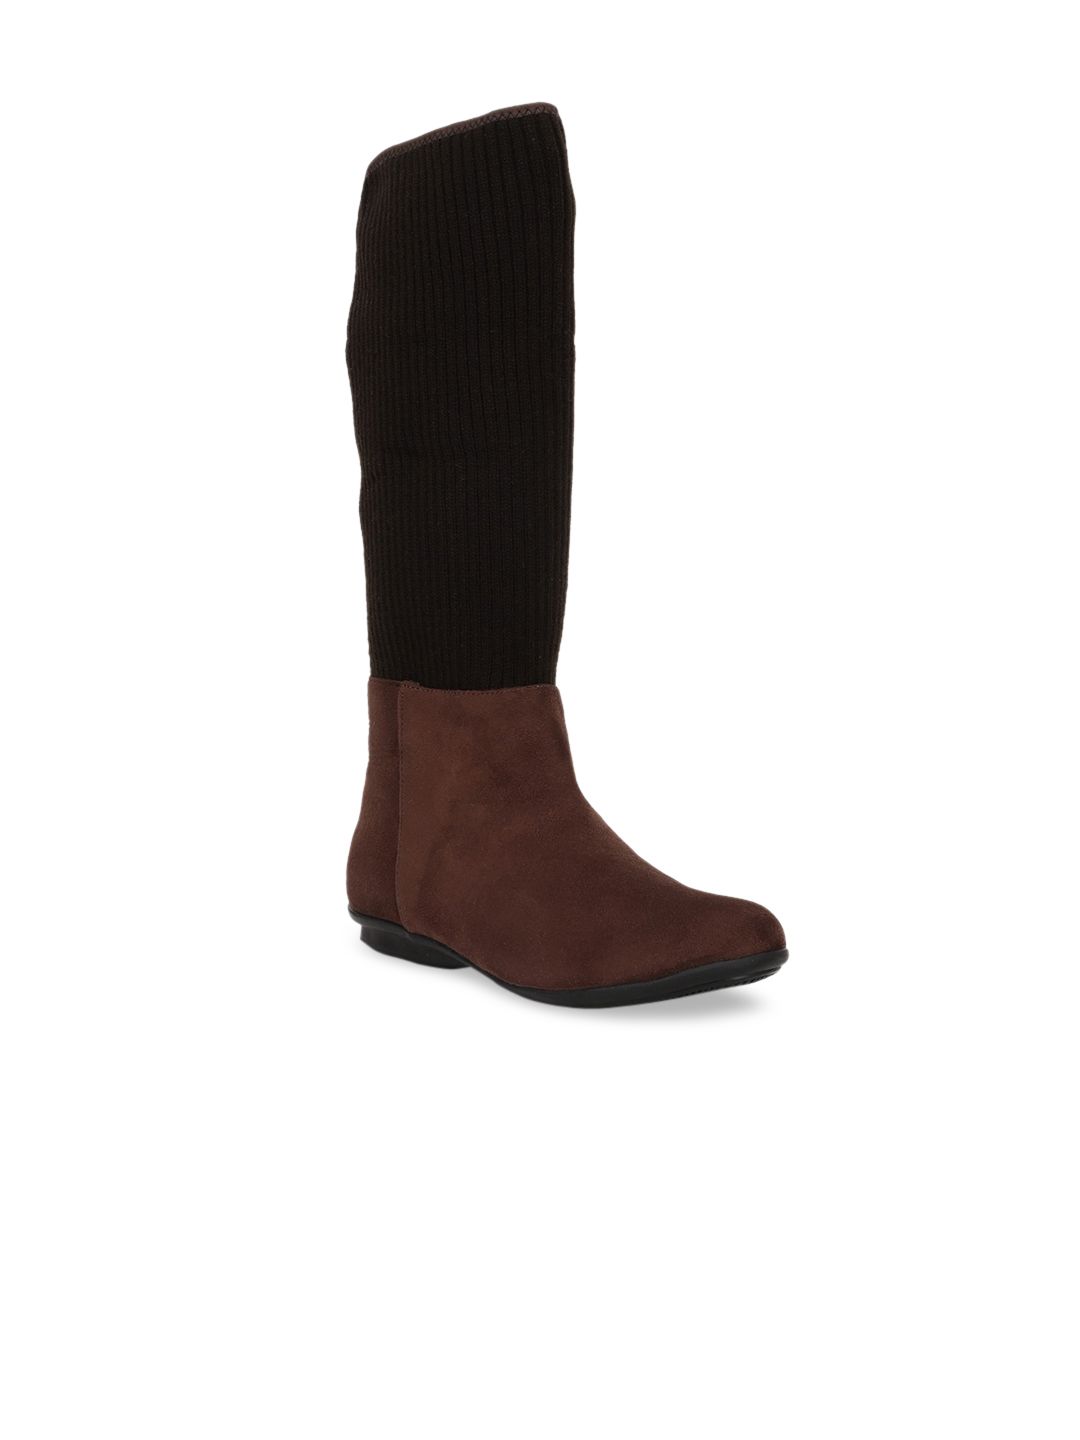 Bruno Manetti Women Brown Flat Boots Price in India